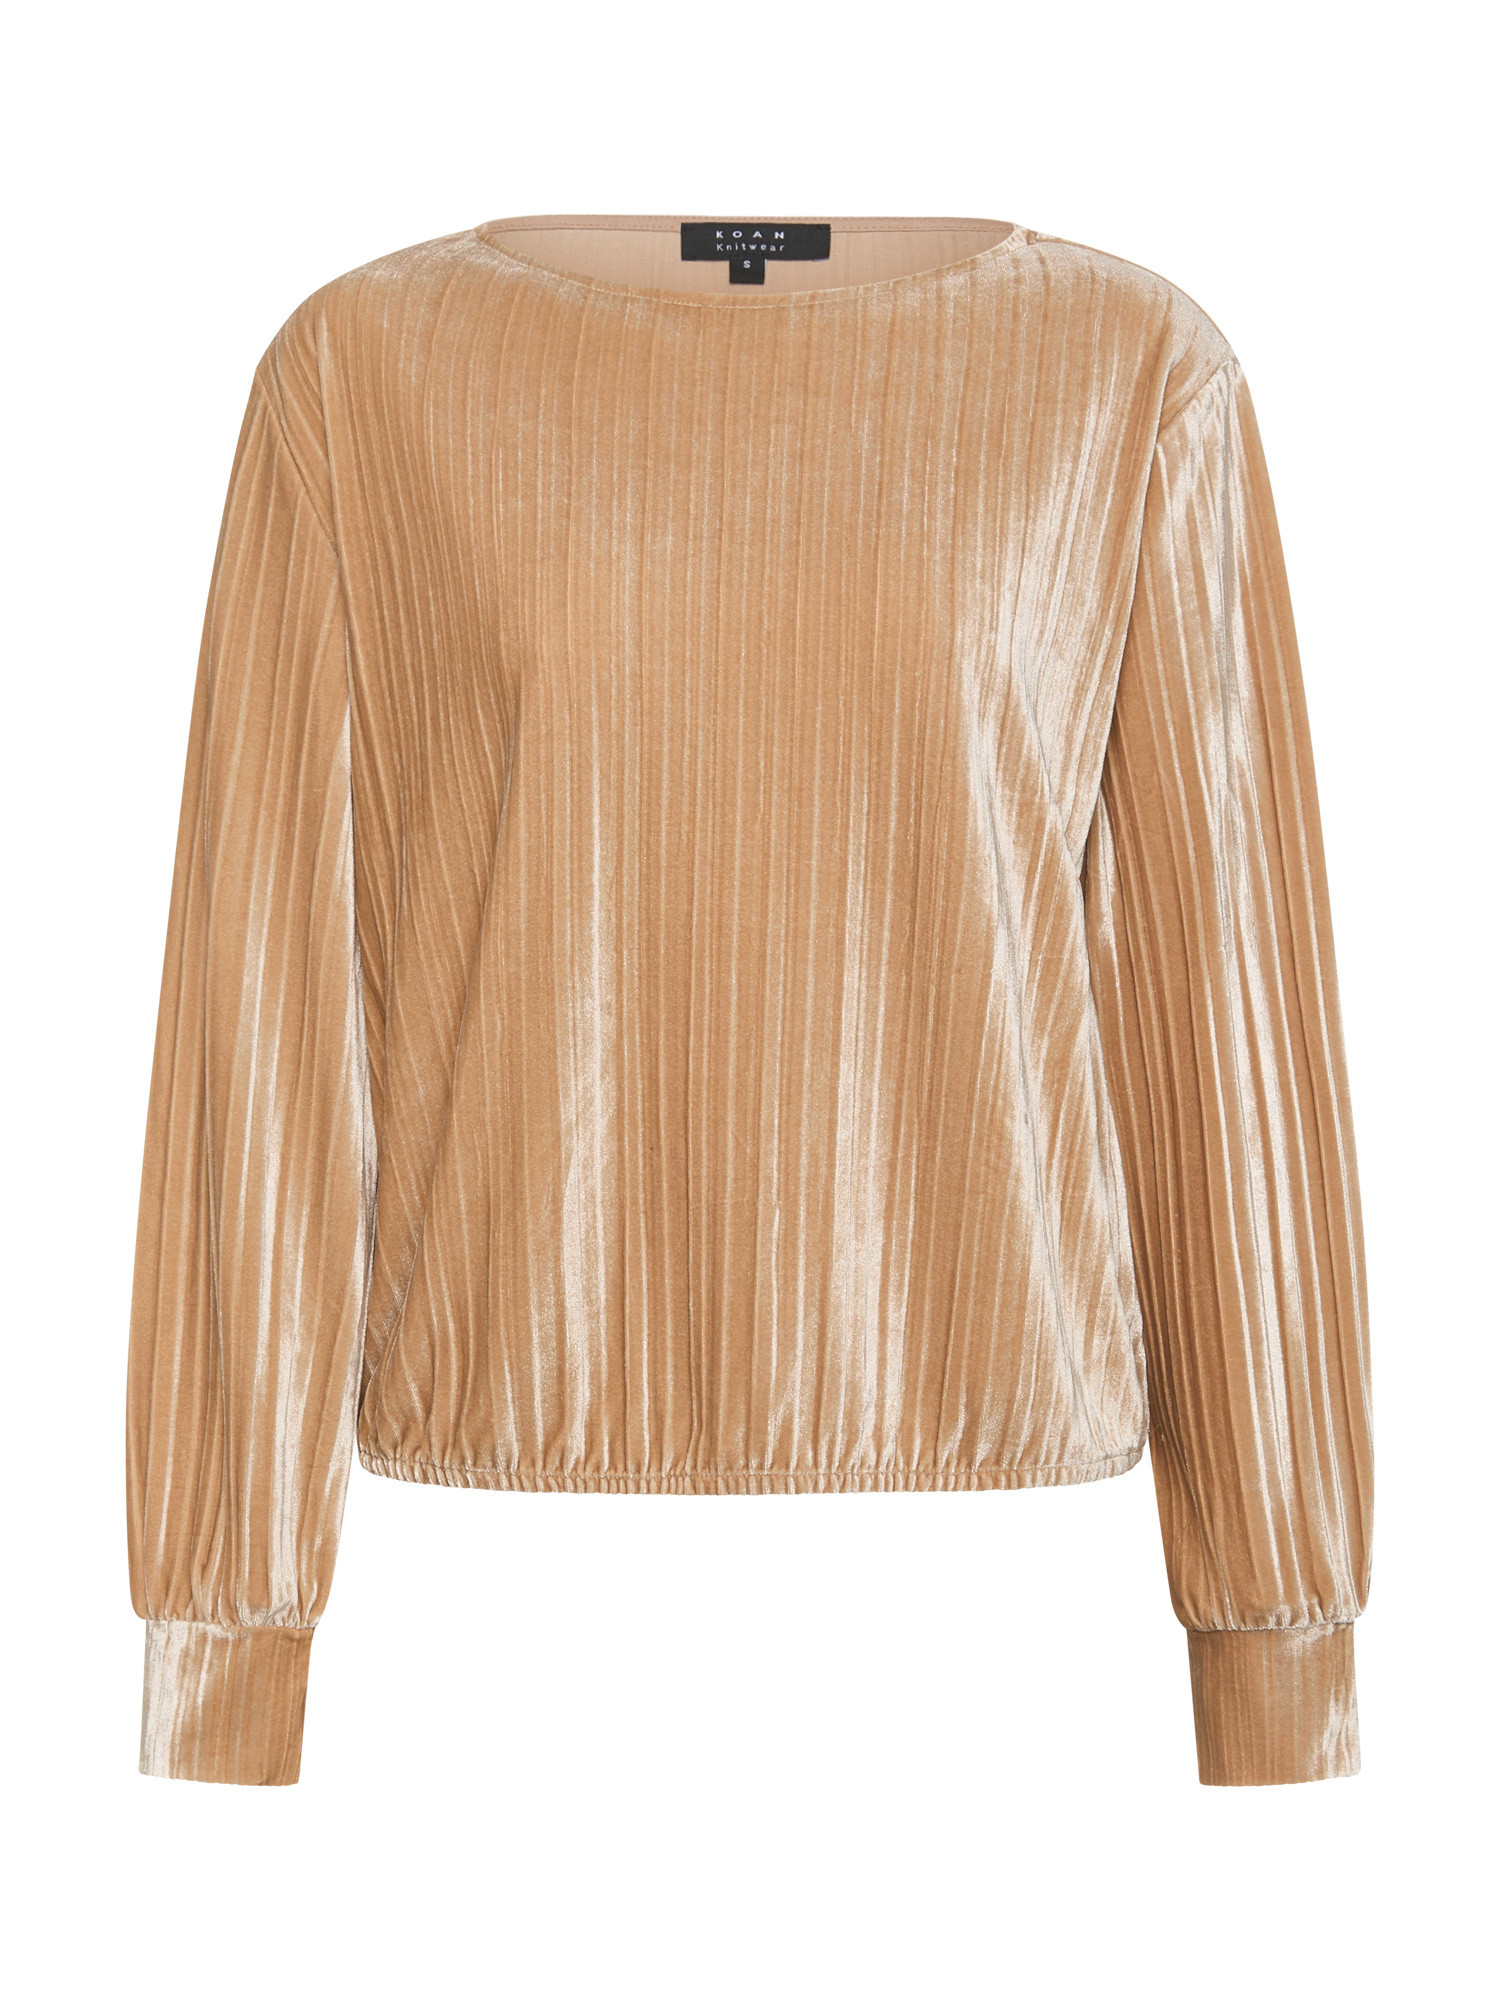 Koan - Pleated effect velvet sweater, Champagne Yellow, large image number 0